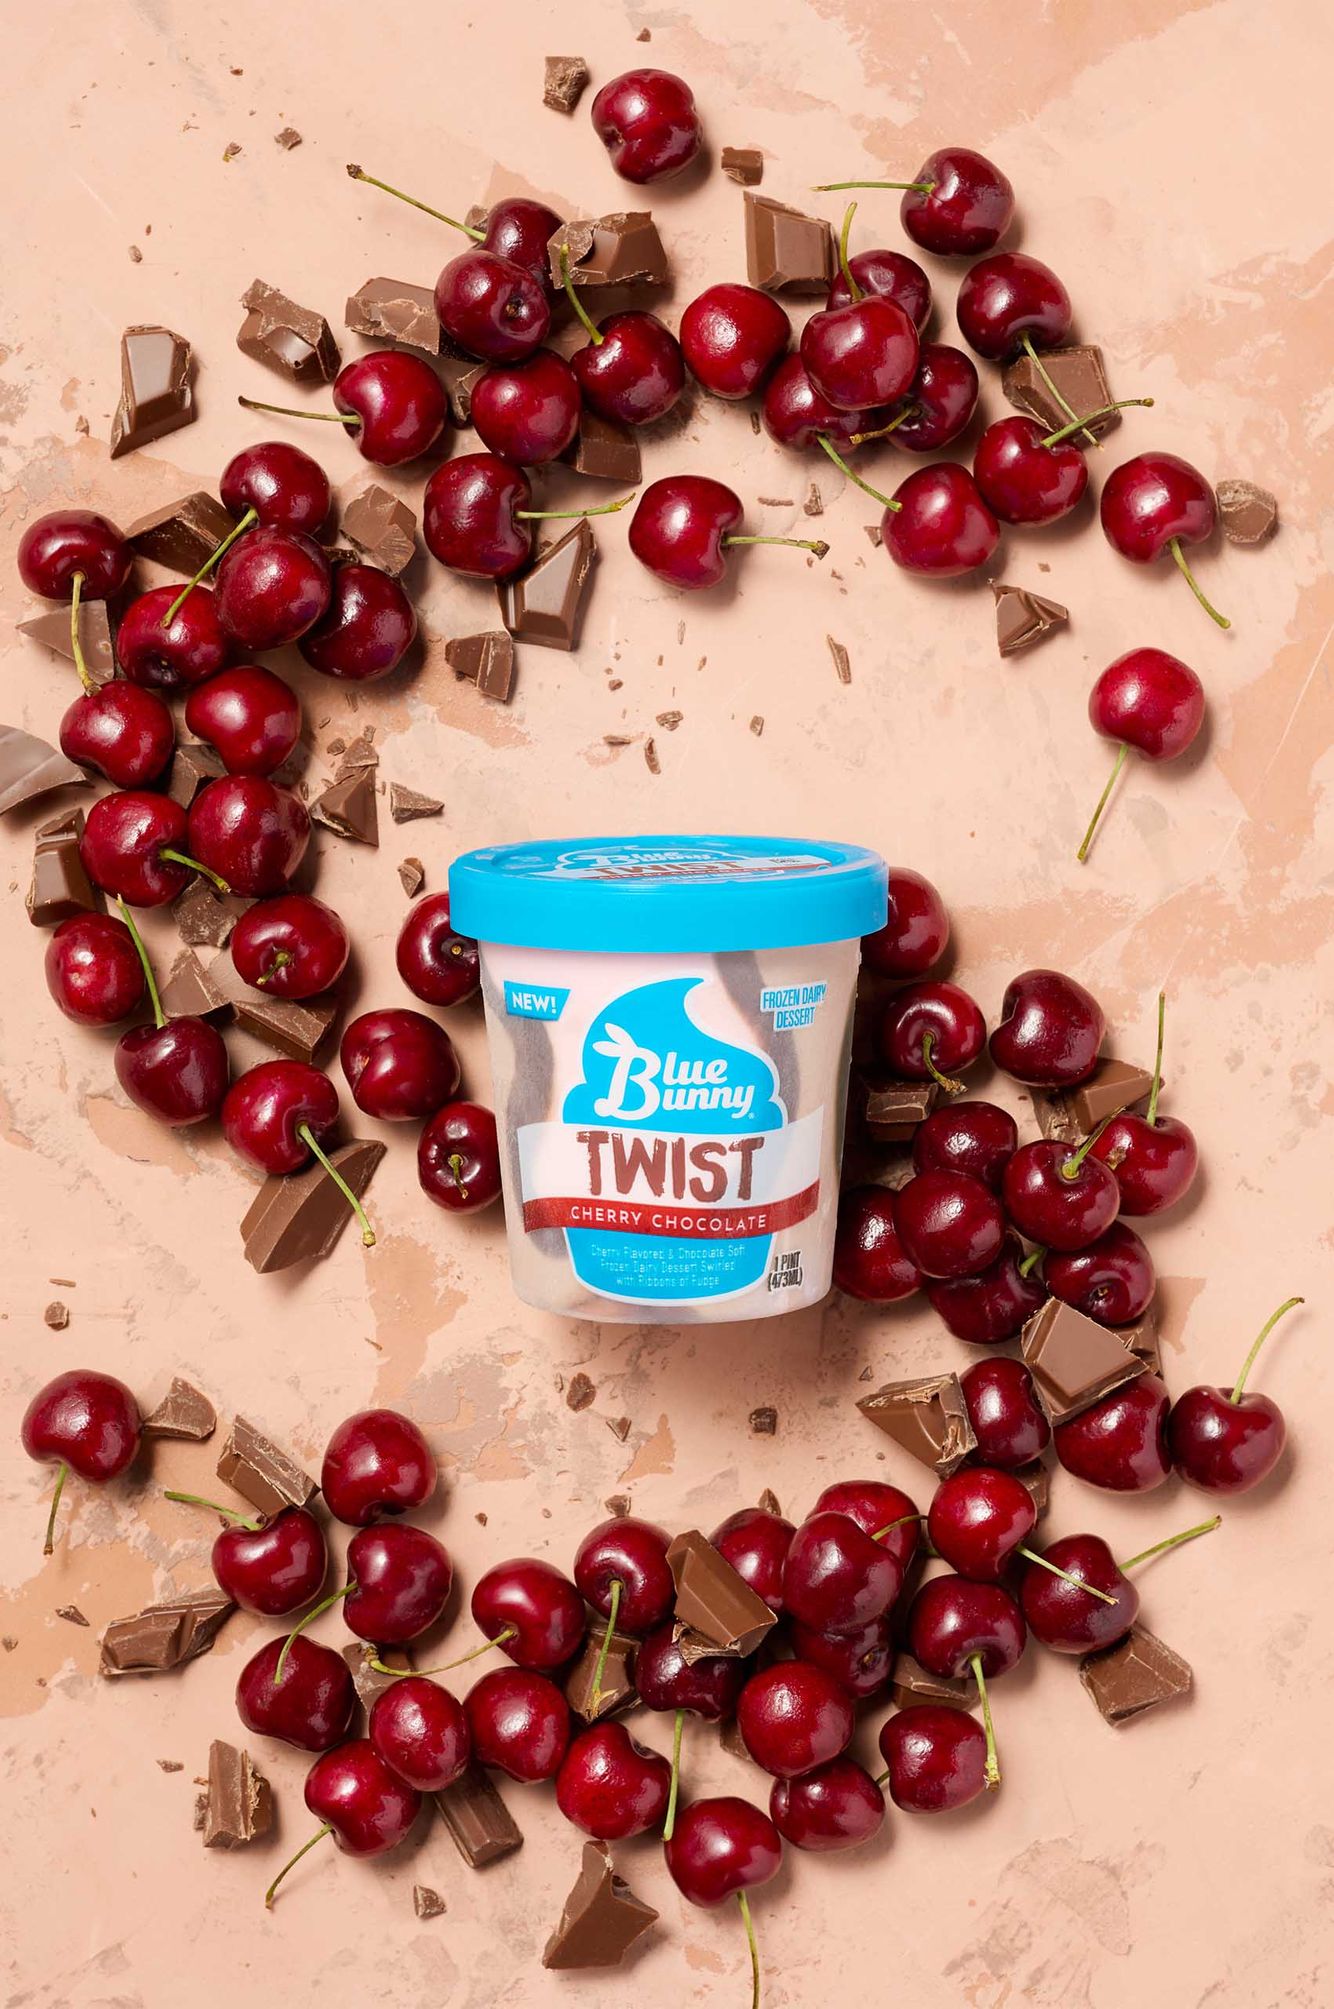 Ice Cream Advertising By Chicago Lifestyle Food Photographer Jeff Schear